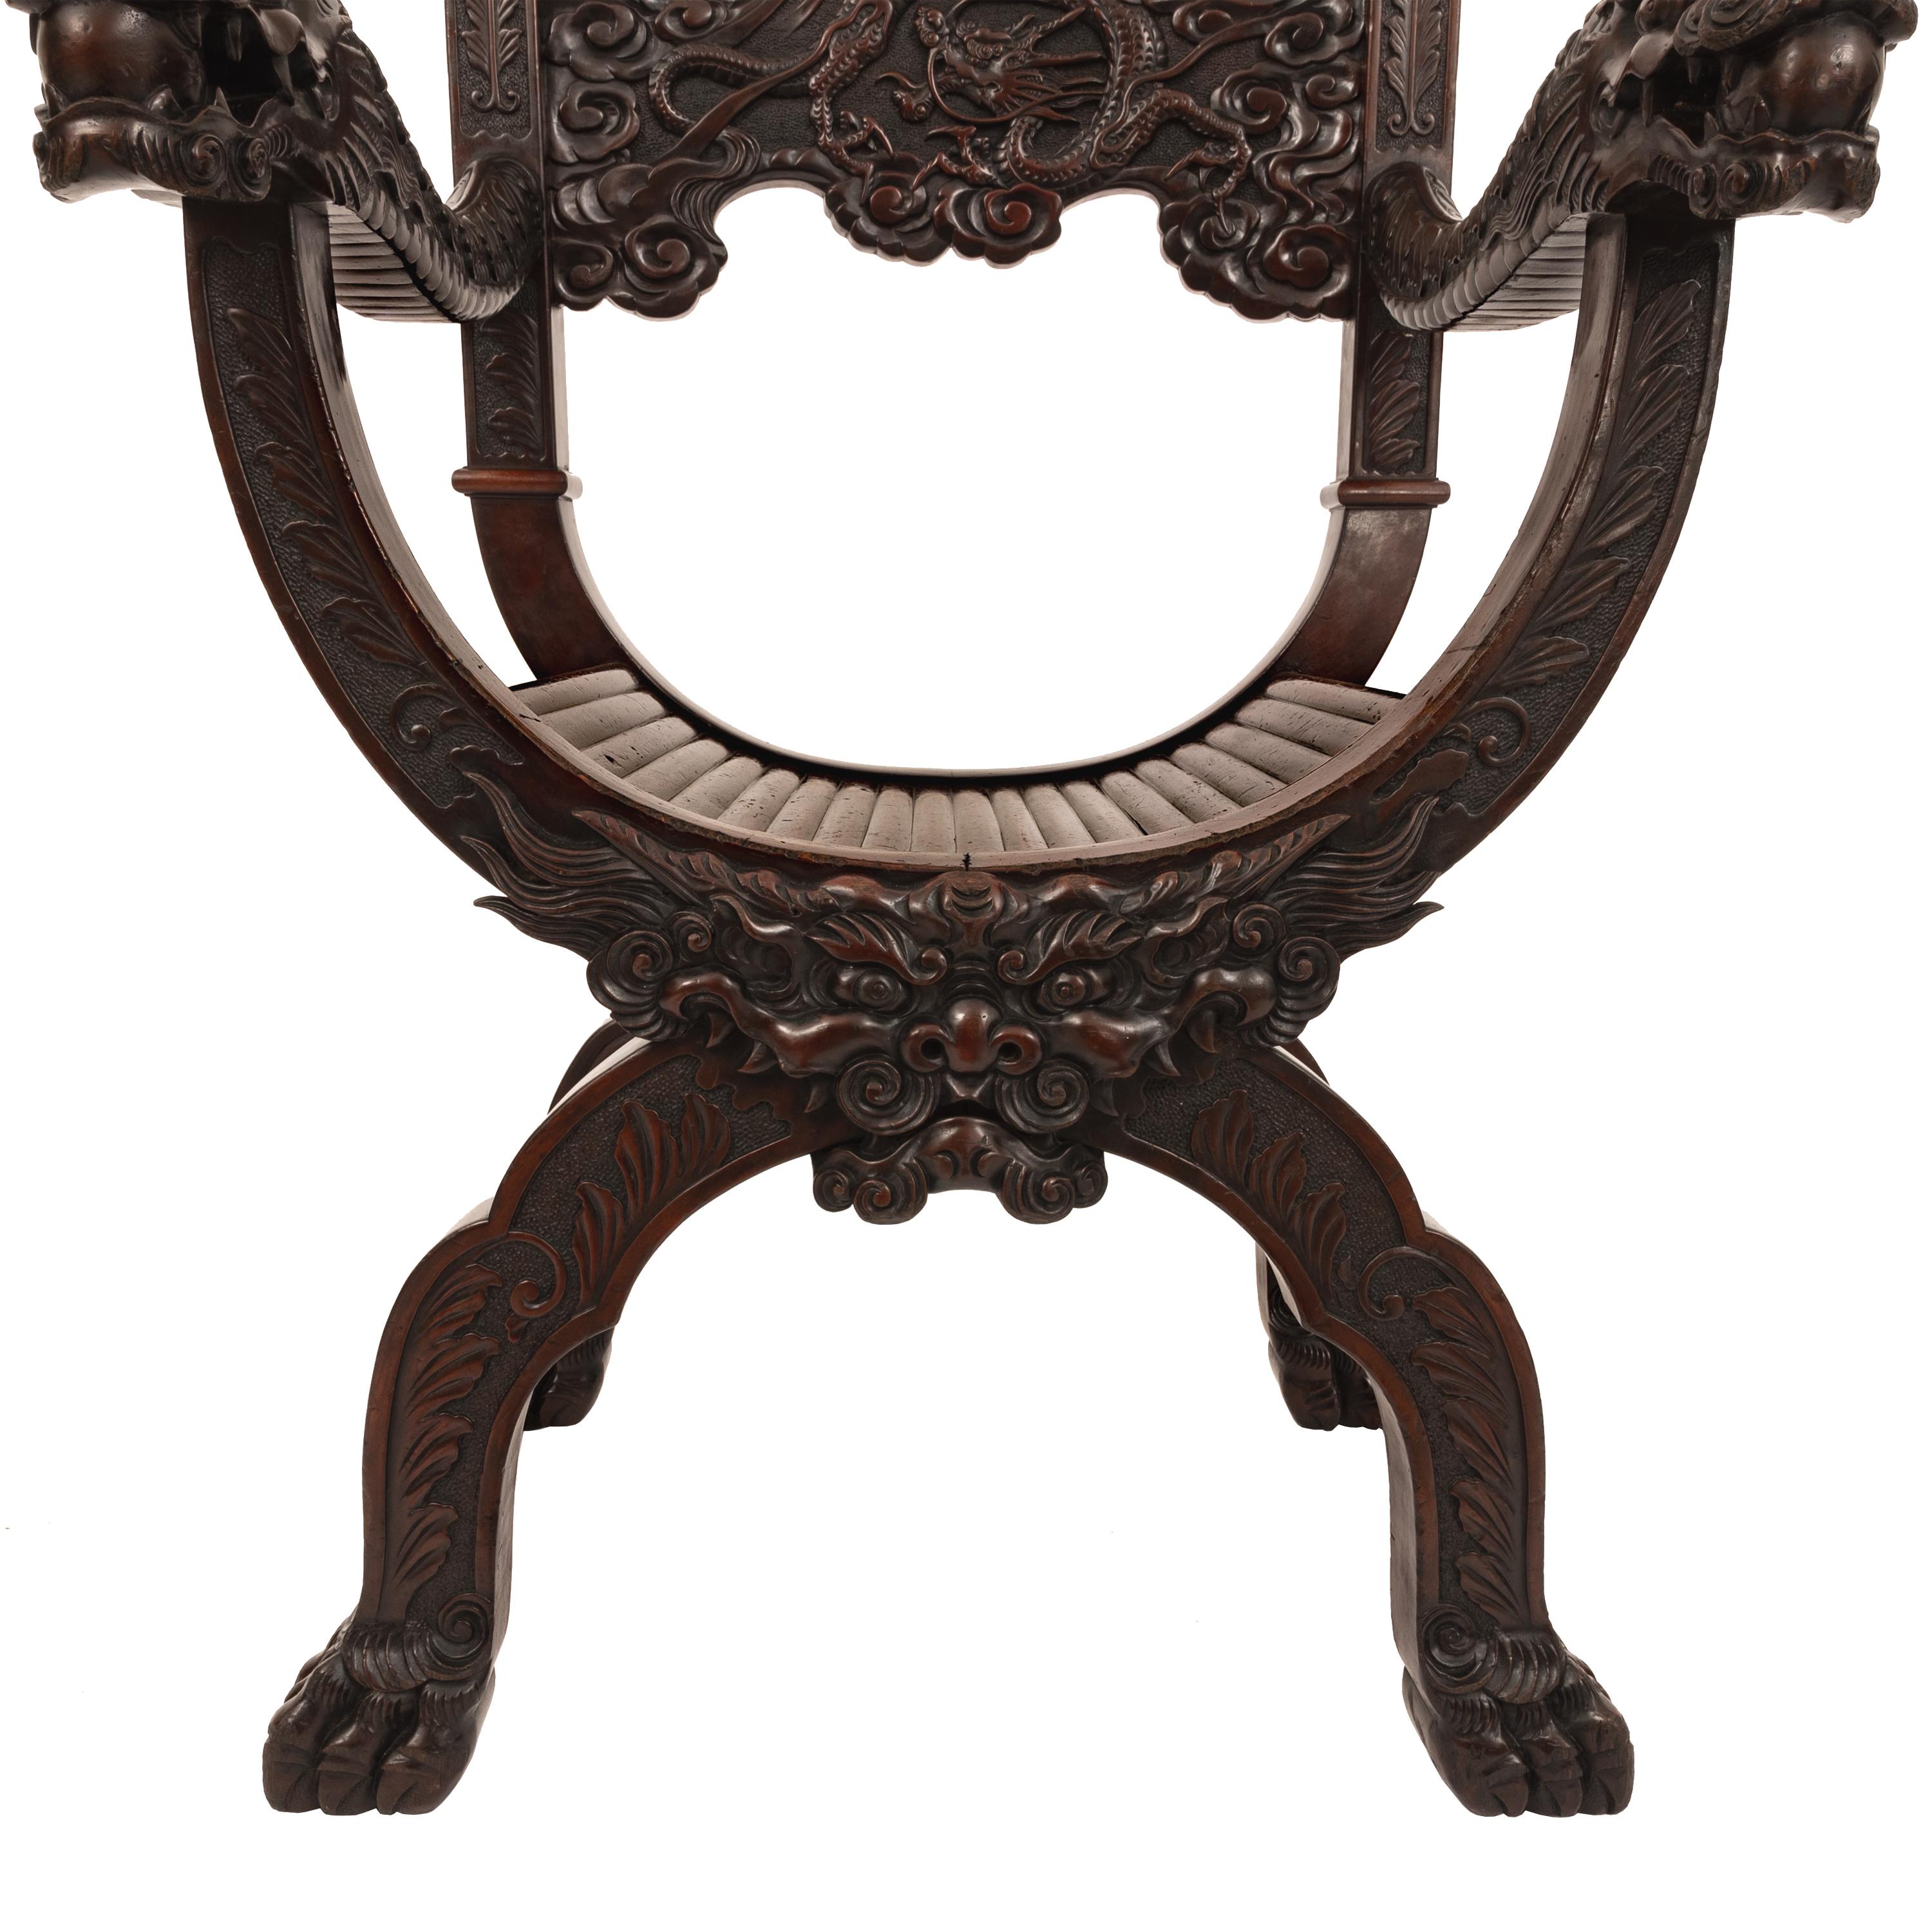 Arts and Crafts Antique American Robert Mitchell Carved Chinoiserie Savonarola Dragon Chair 1900 For Sale